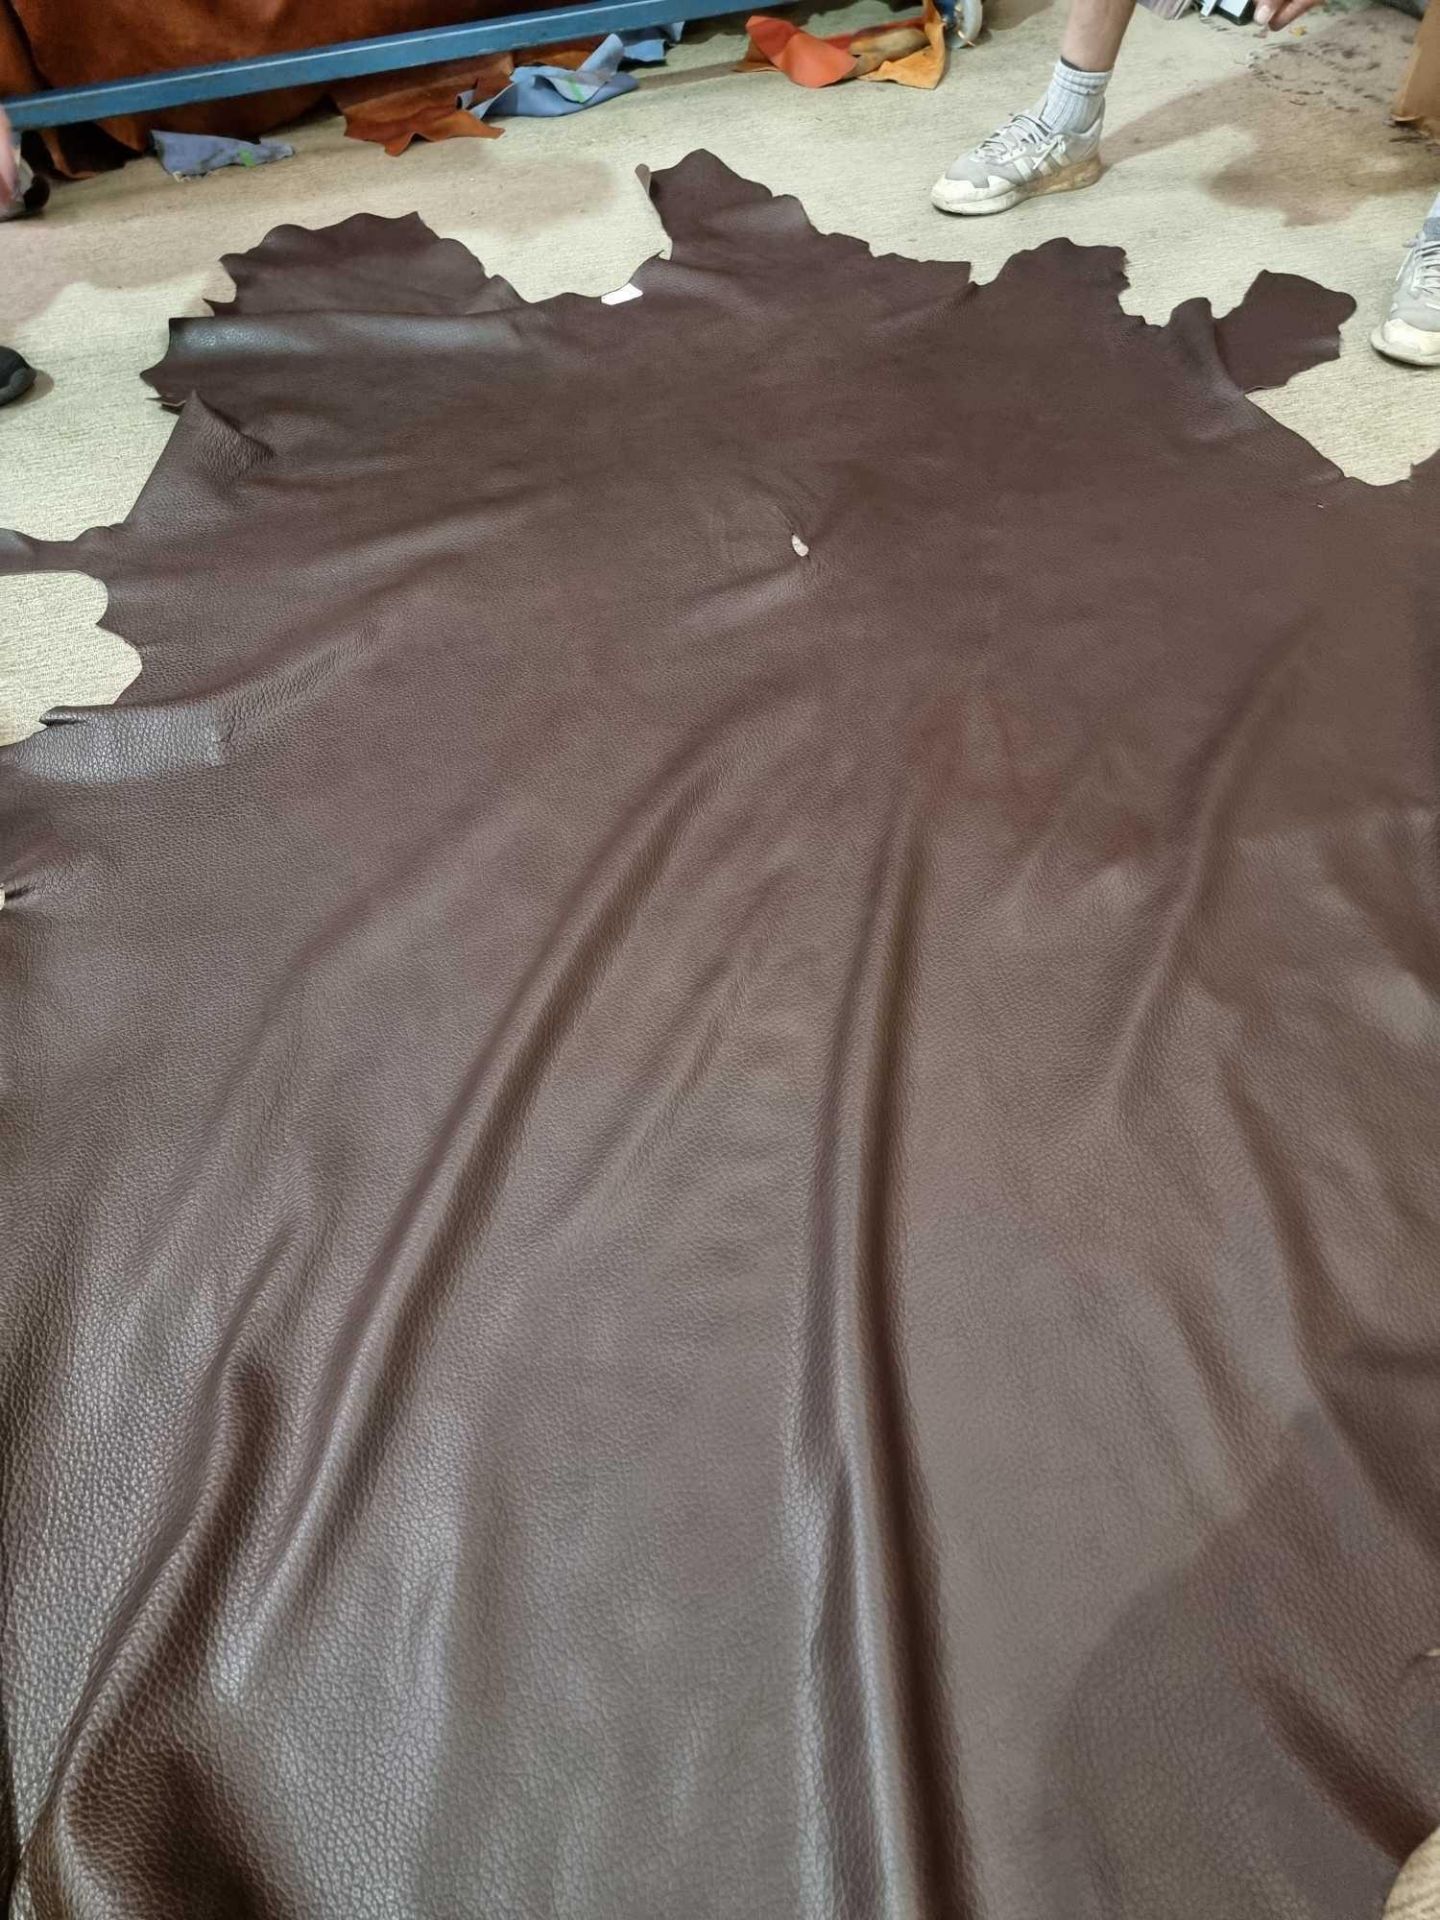 Chocolate 454 Leather Hide approximately 3.74mÂ² 2.2 x 1.7cm - Image 2 of 2